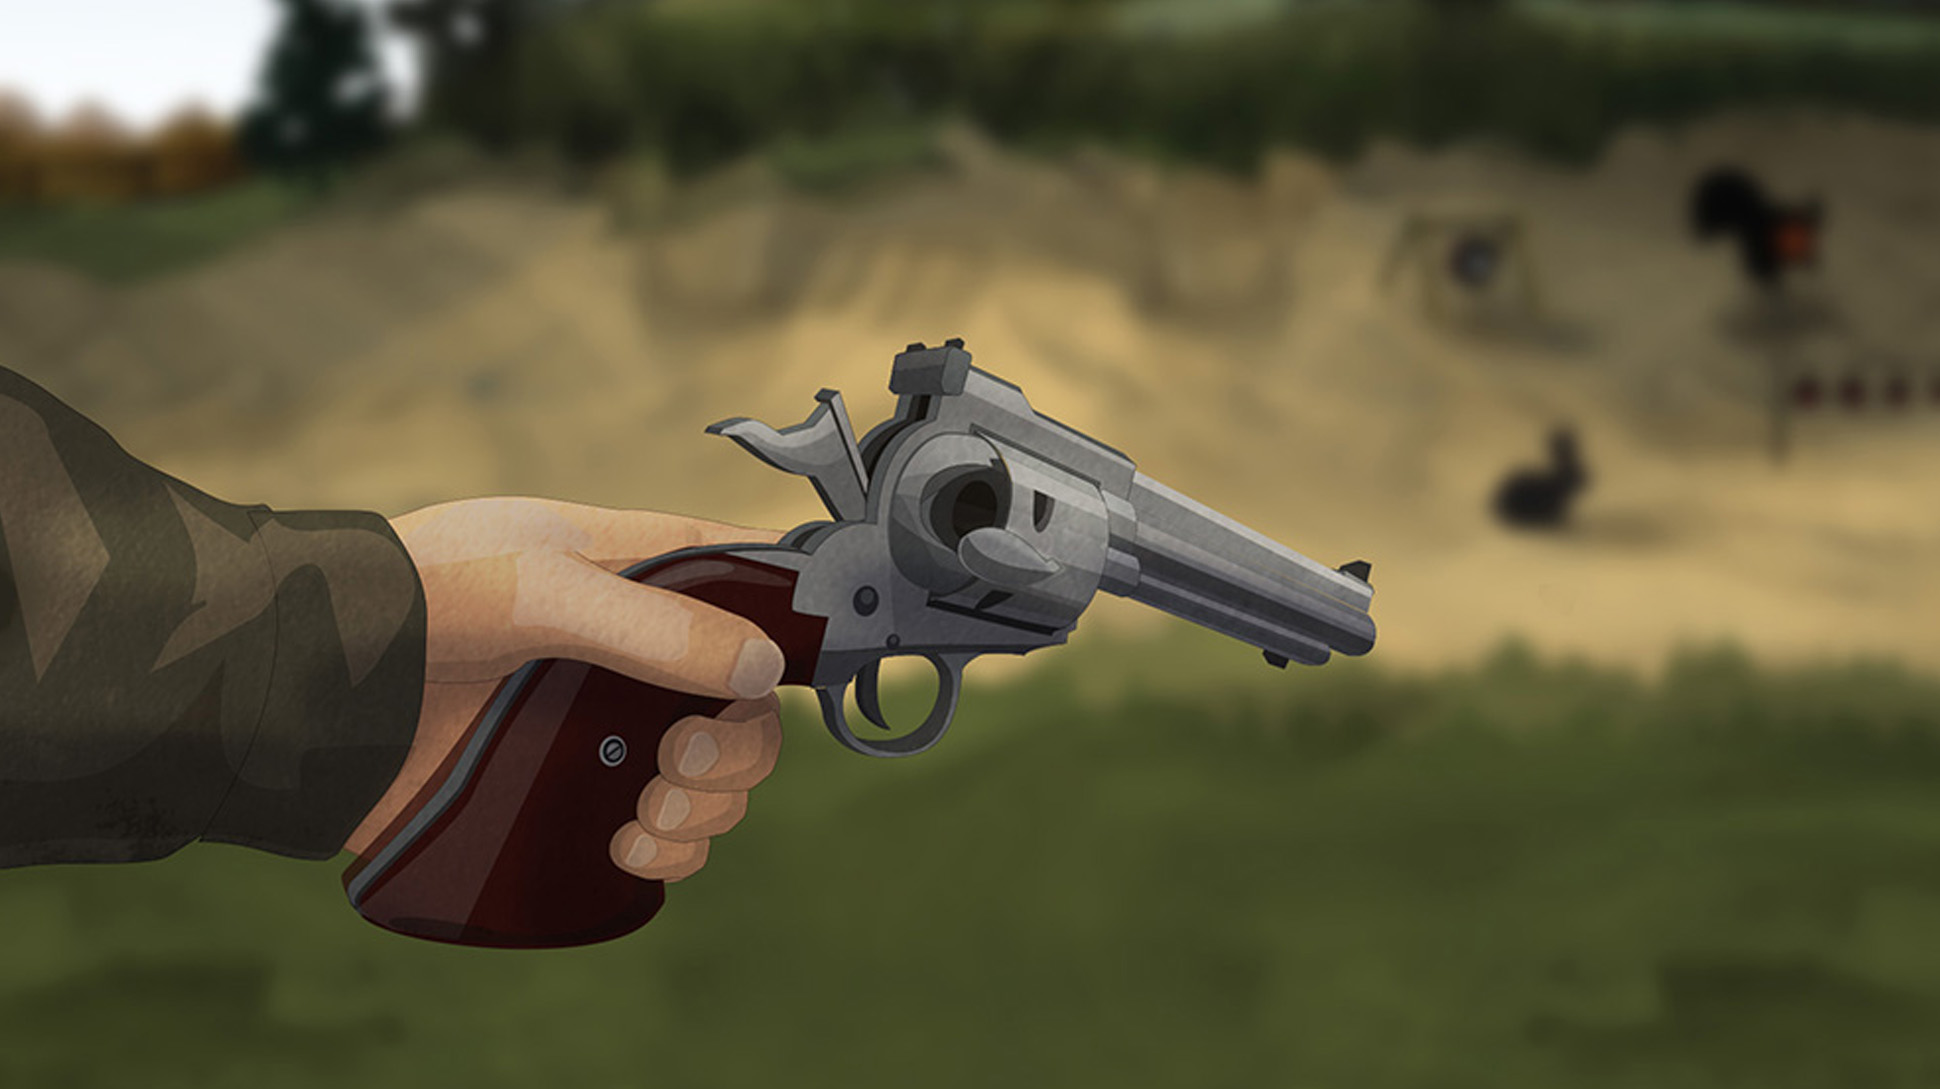 Illustration of a hunter's hand holding a revolver and checking the cylinder for ammunition and obstructions.